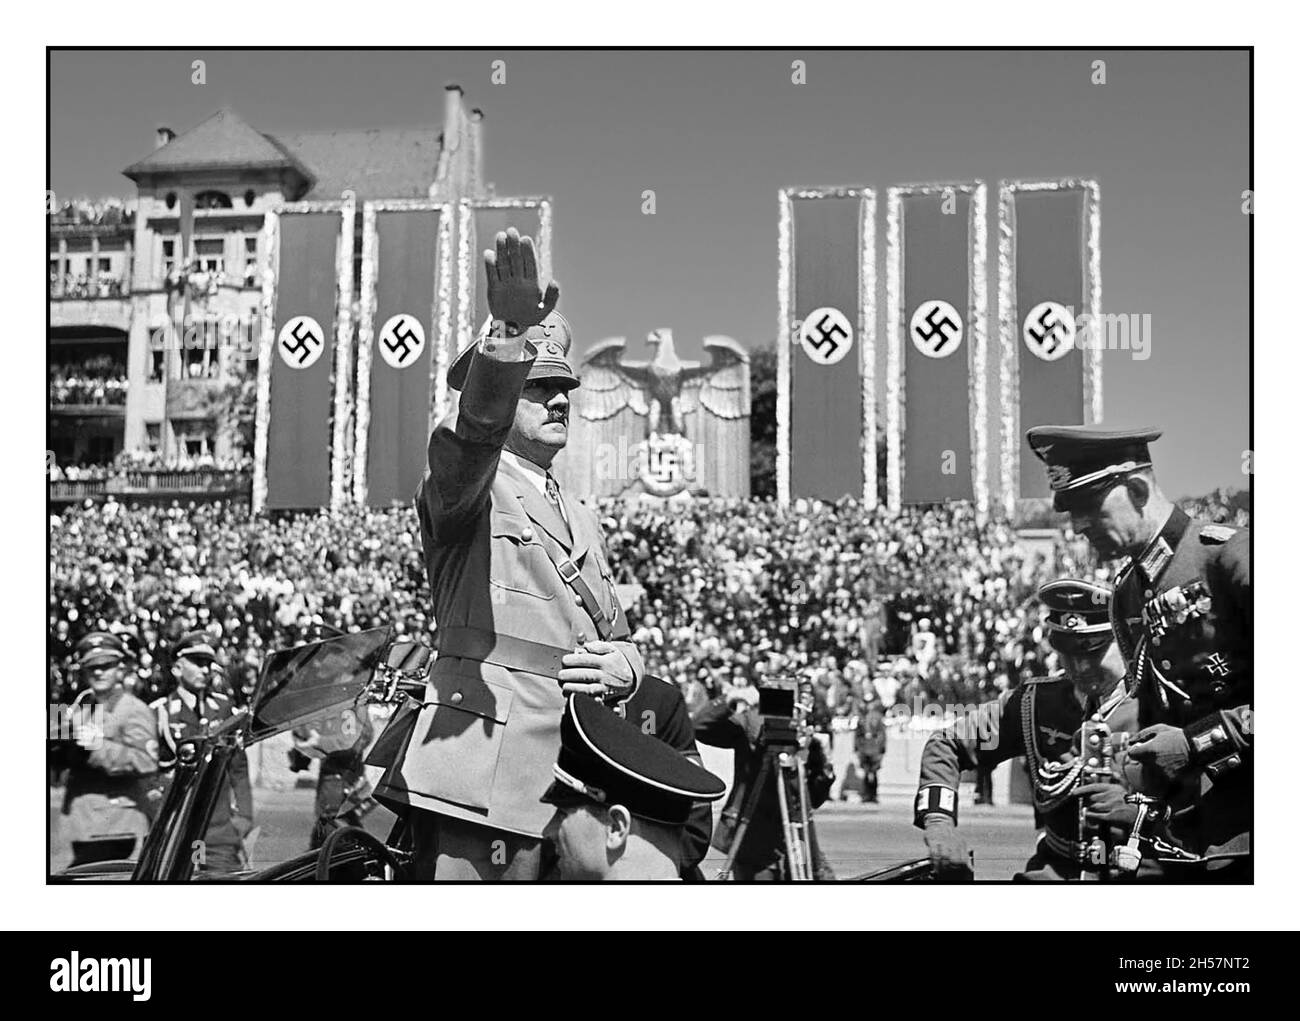 CONDOR LEGION Nazi Propaganda image 1930s of Adolf Hitler saluting troops of the Condor Legion who fought alongside Spanish Nationalists in the Spanish civil war during a rally on their return to Germany The Condor Legion (German: Legion Condor) was a unit composed of military personnel from the air force and army of Nazi Germany, which served with the Nationalists during the Spanish Civil War of July 1936 to March 1939. Stock Photo